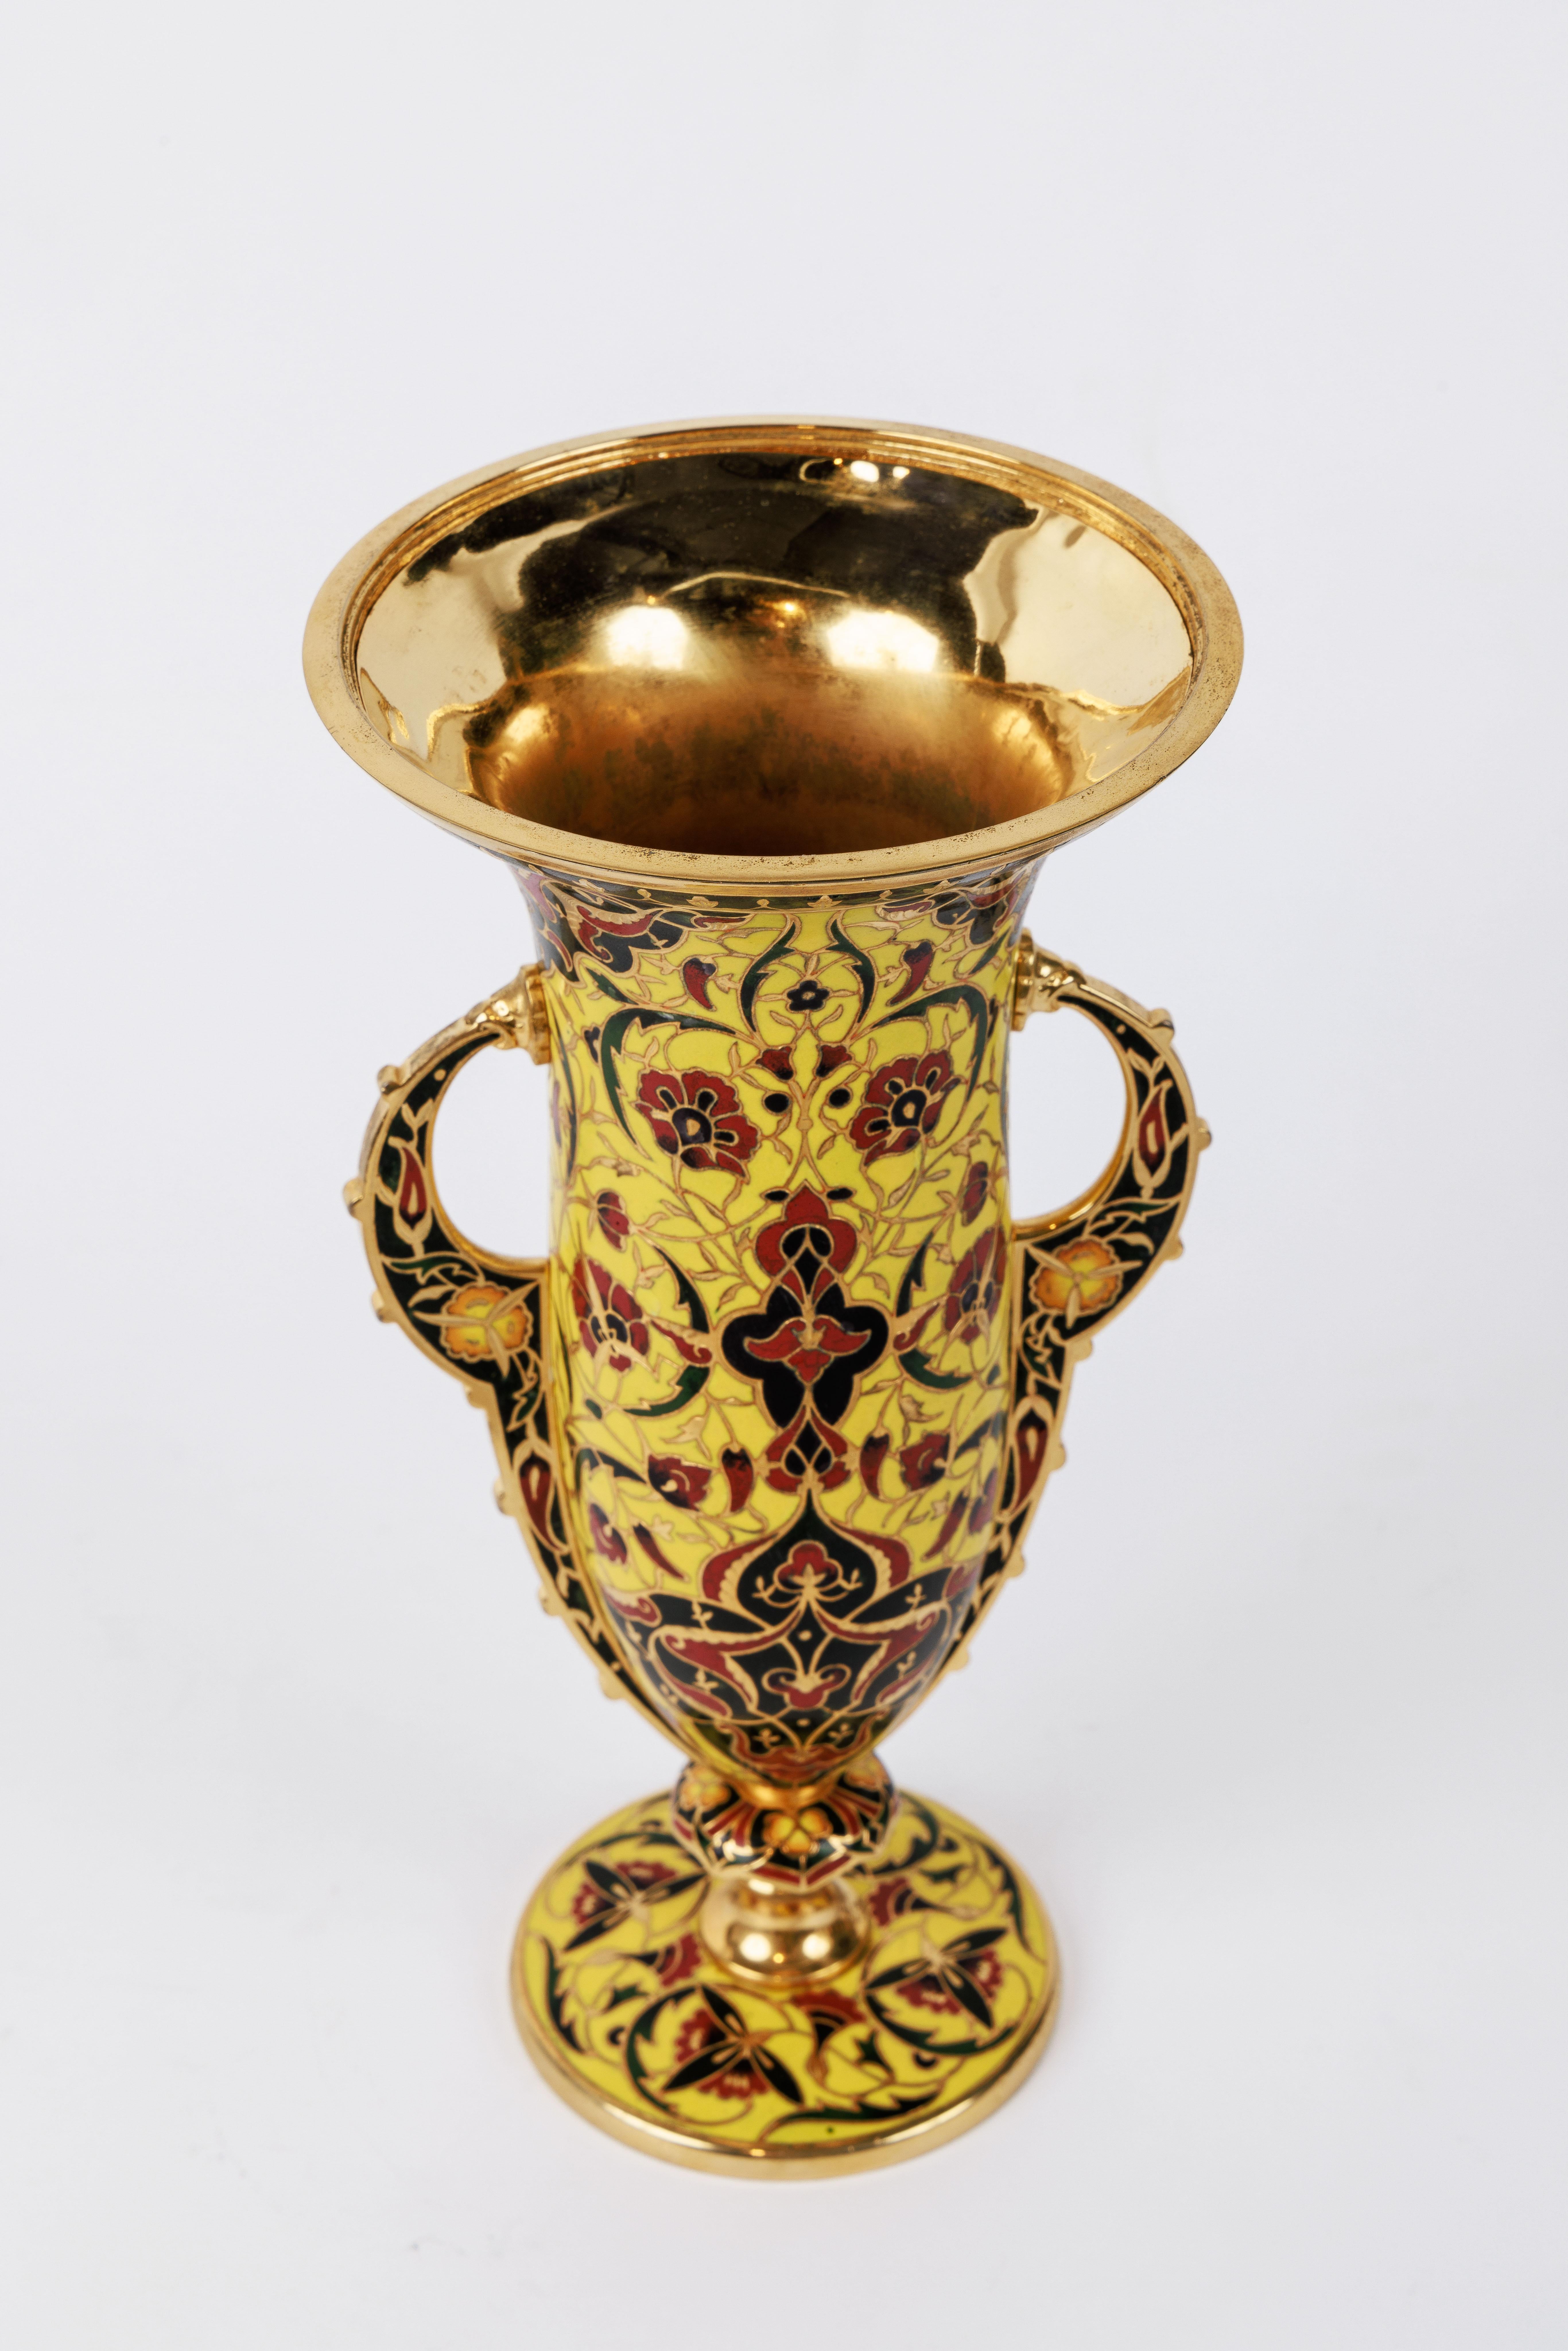 Ferdinand Barbedienne, A French Ormolu and Champleve Enamel Vase, C. 1870 For Sale 2